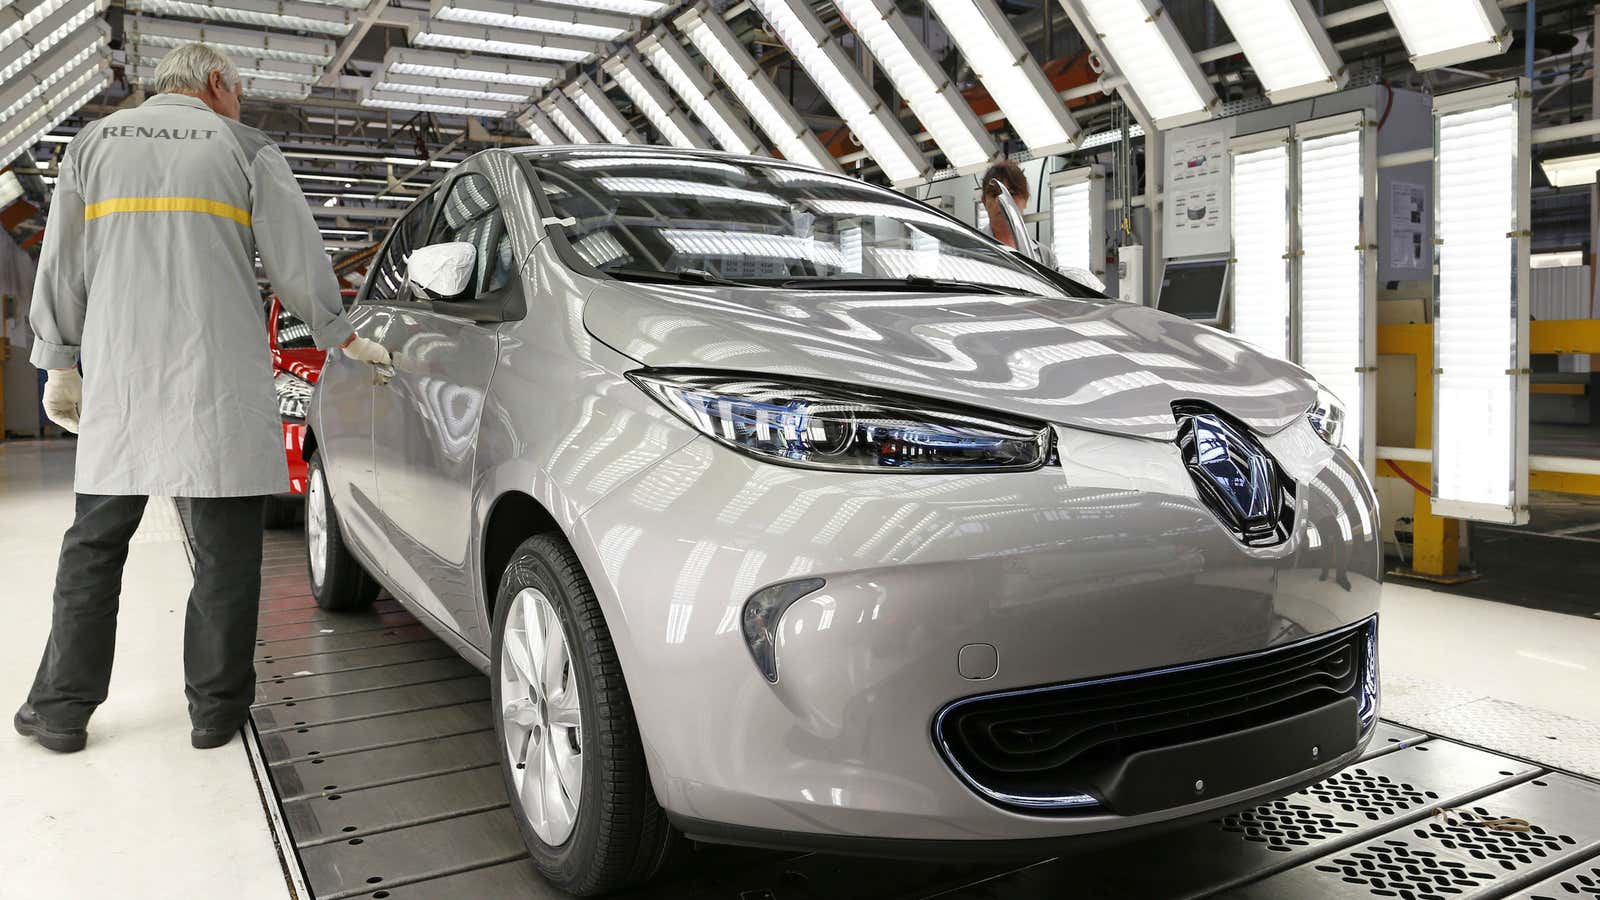 Coming to an assembly line in China soon?